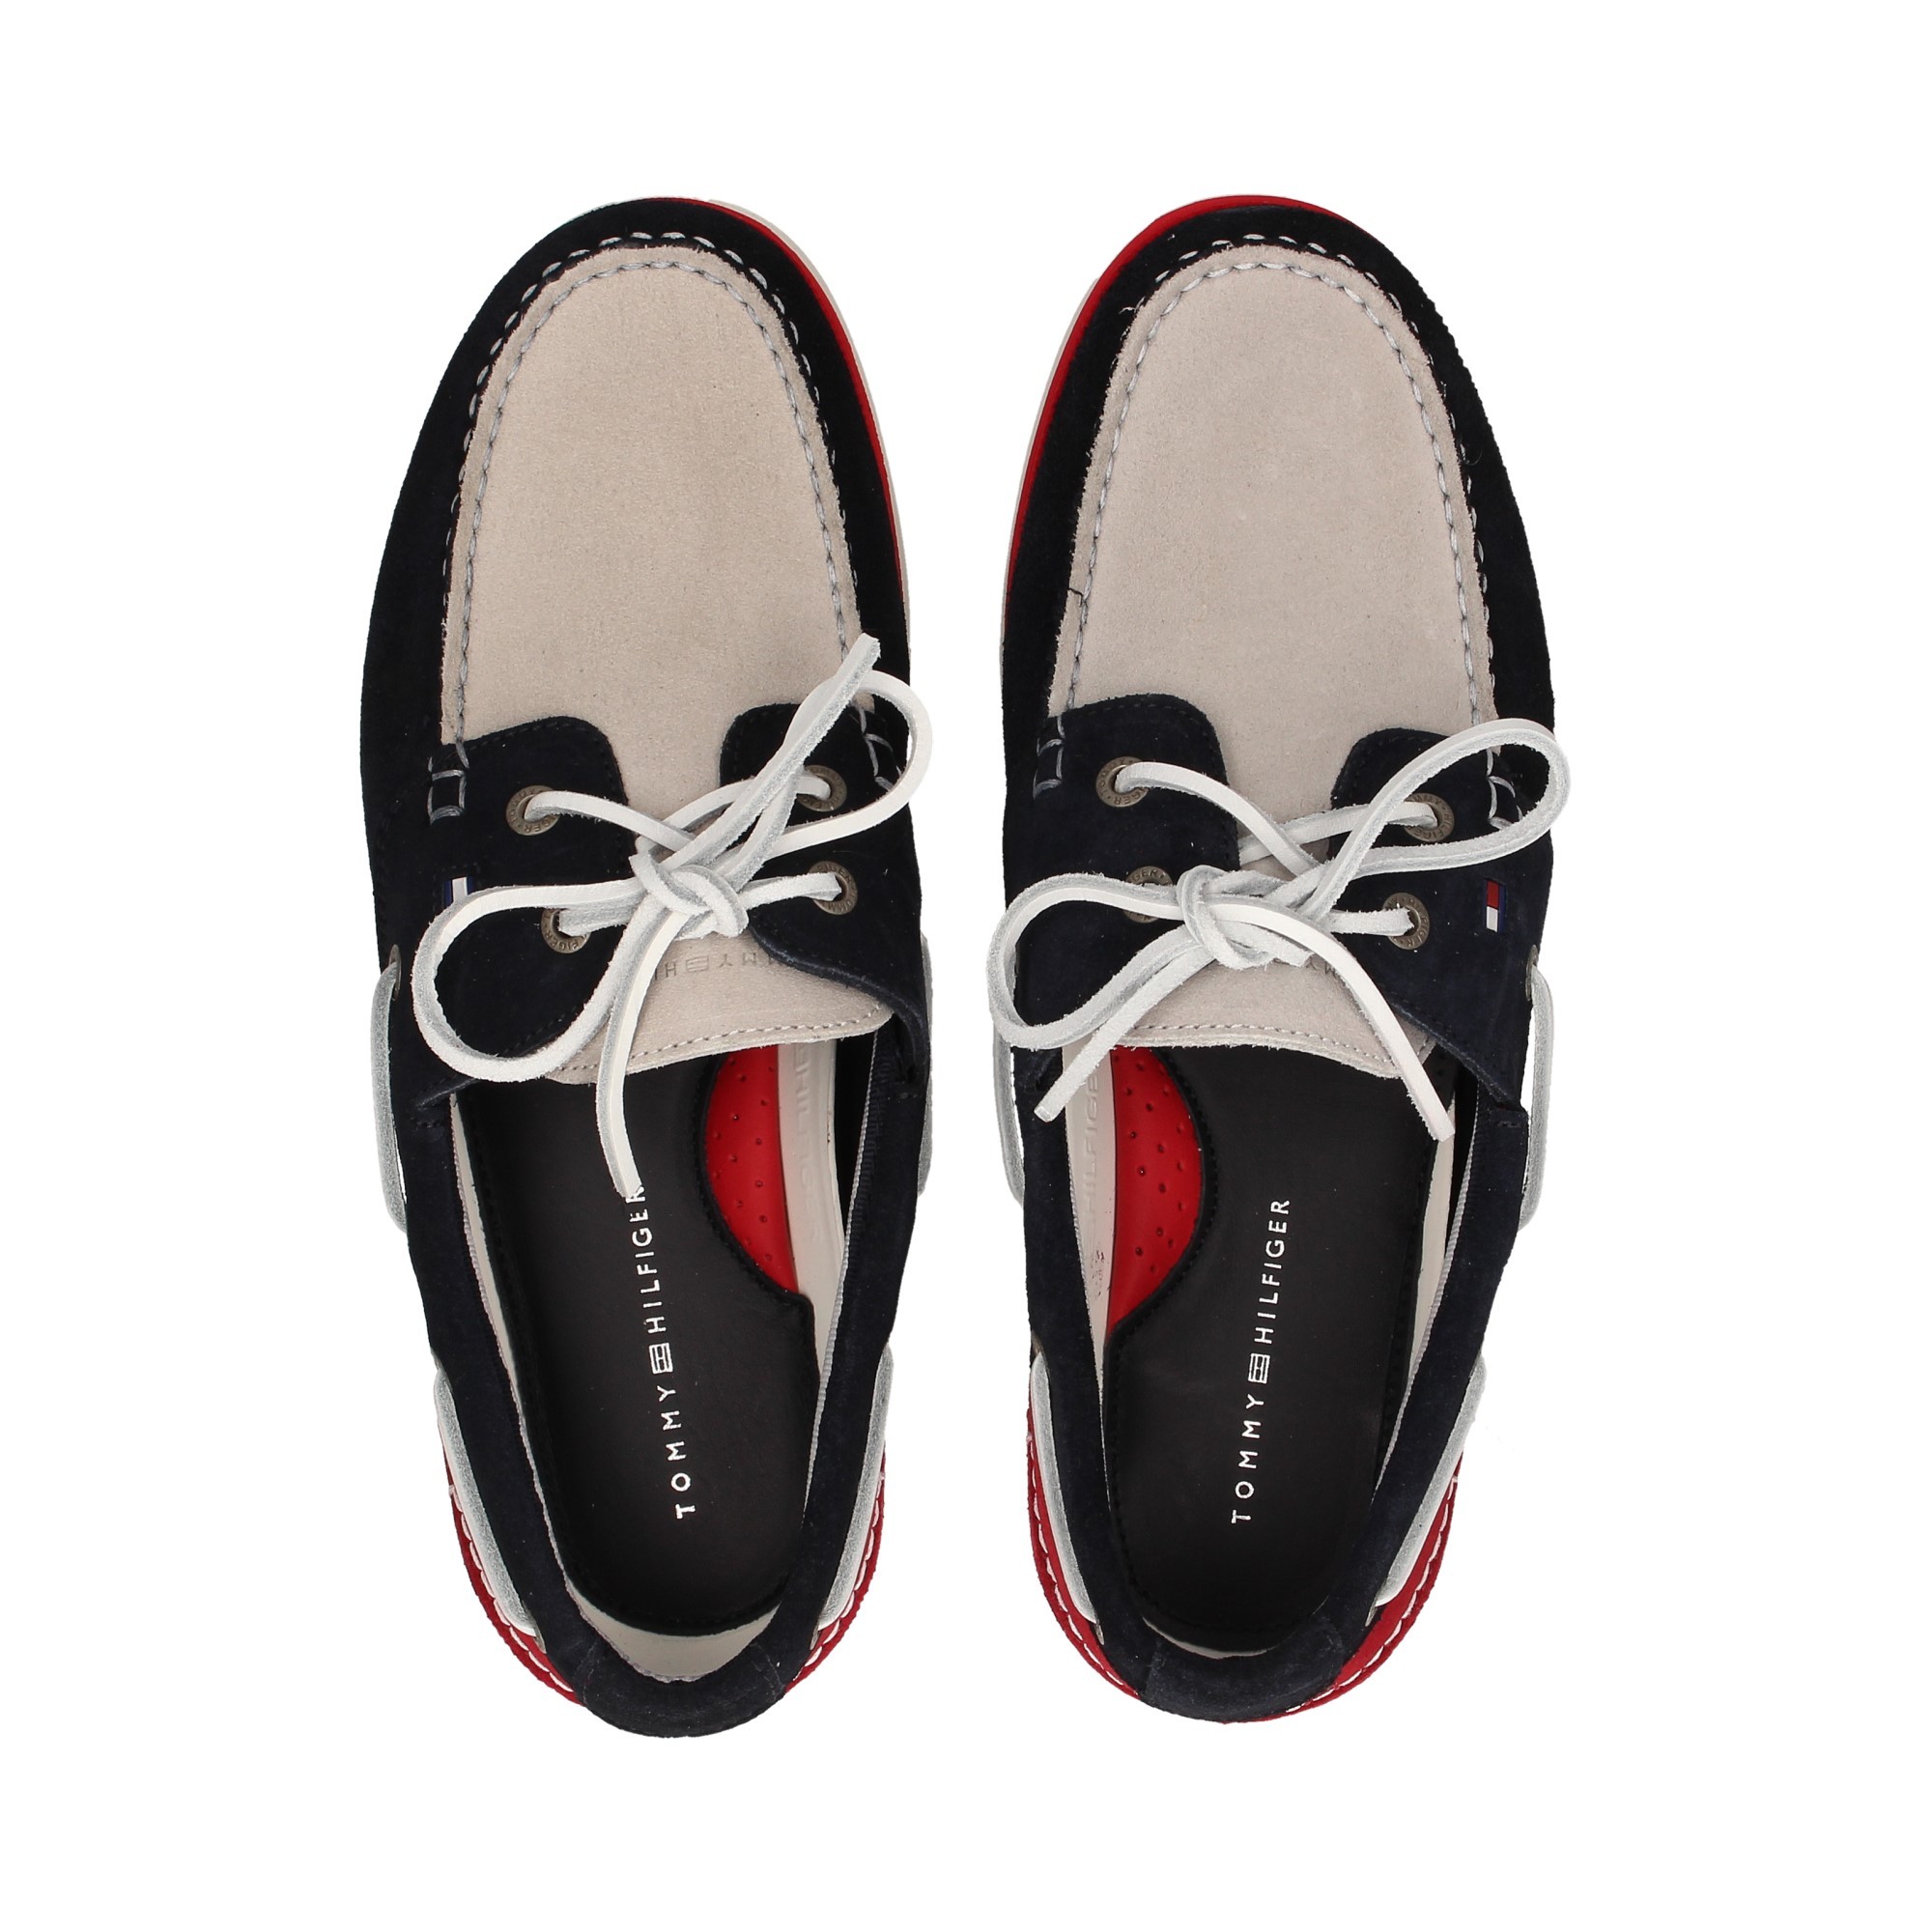 nautical-suede-red-white-blue